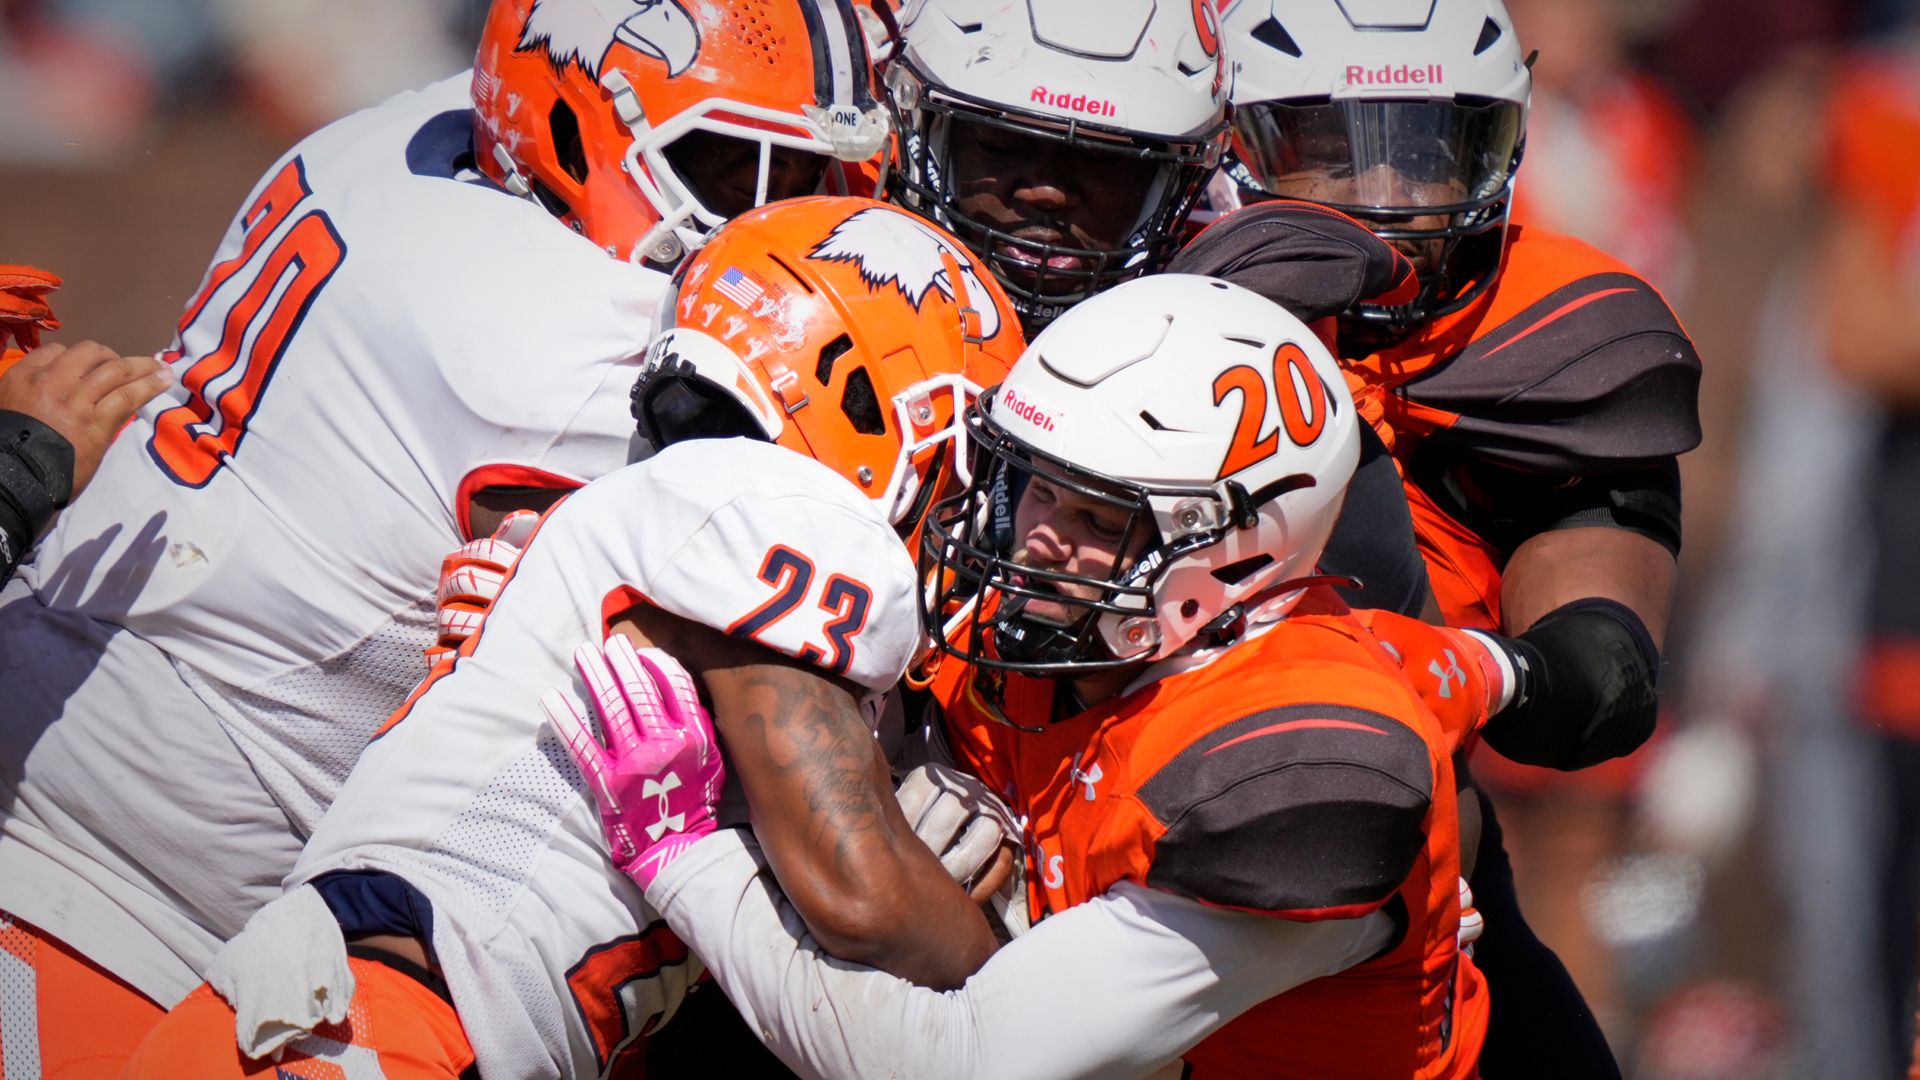 Tusculum, Emory & Henry renew gridiron rivalry for first time in 72 years